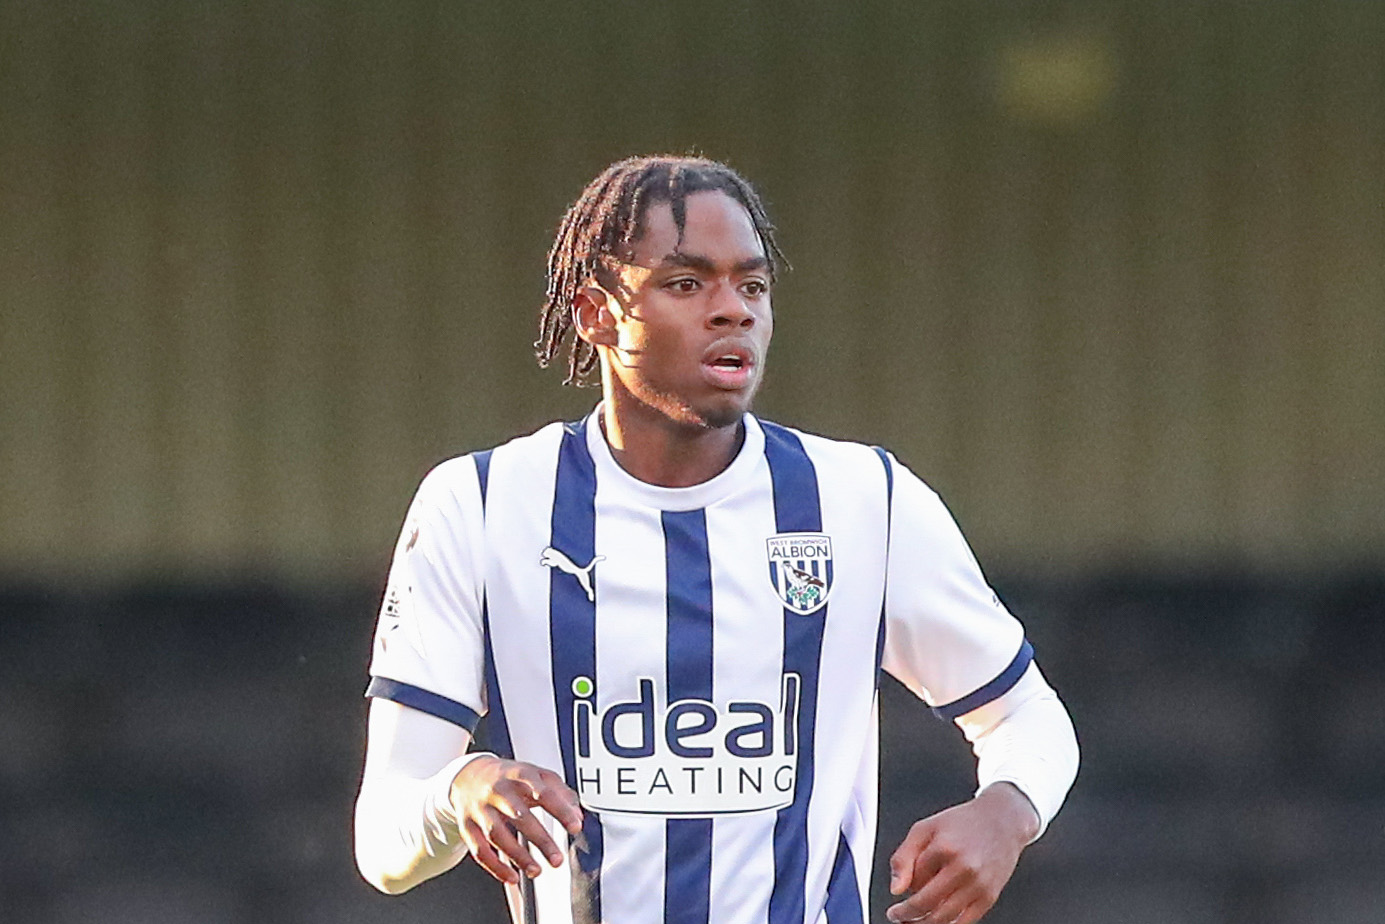 Akeel Higgins wearing the Albion home shirt in PL2 action